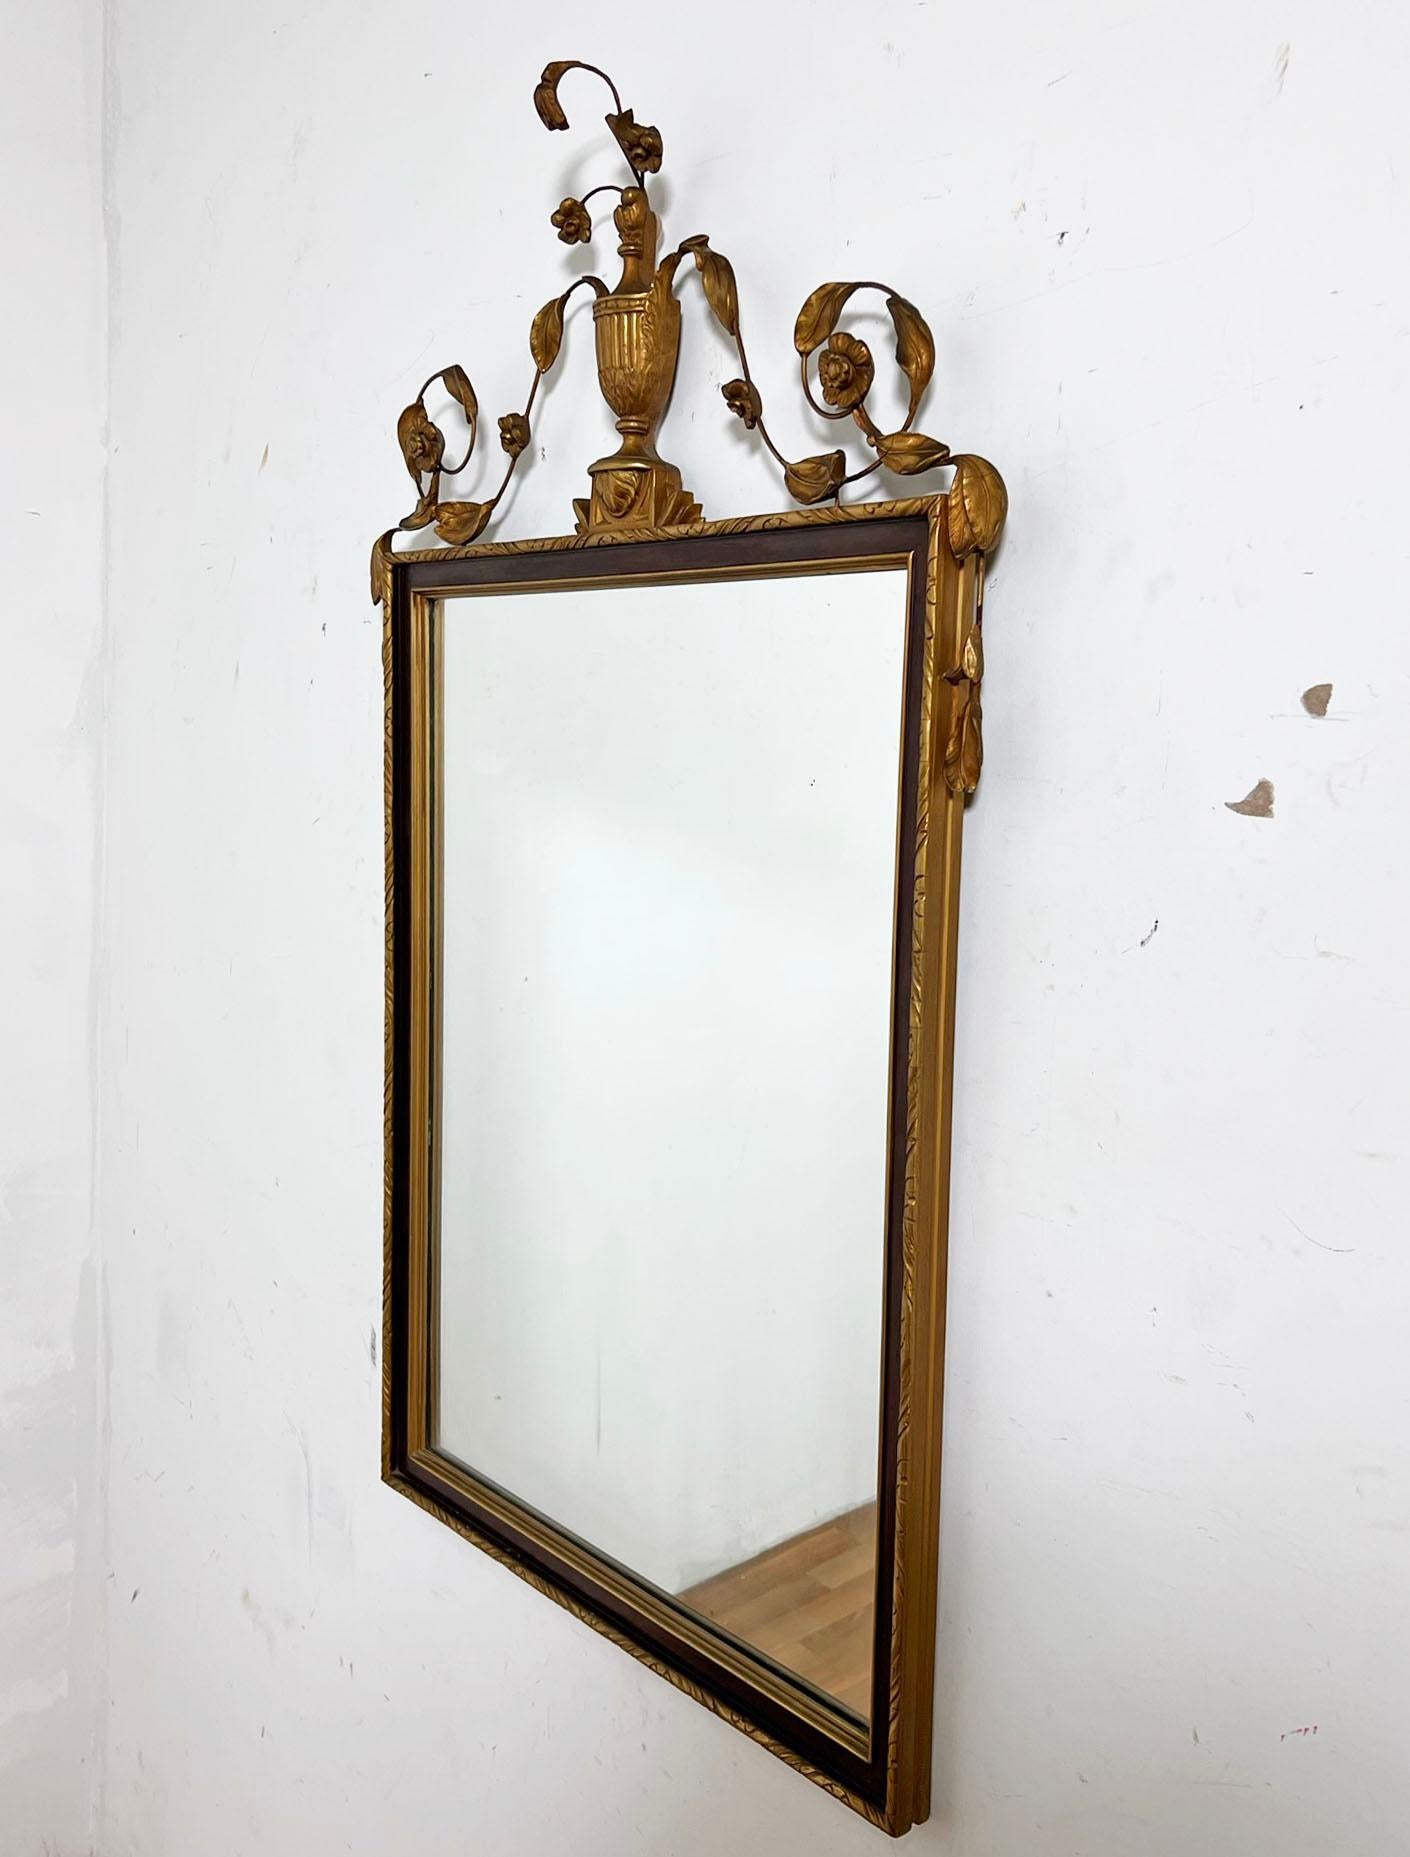 French empire style wall mirror featuring a classic motif of gilt leaf and flower vining emanating from a center urn, circa 1960s.